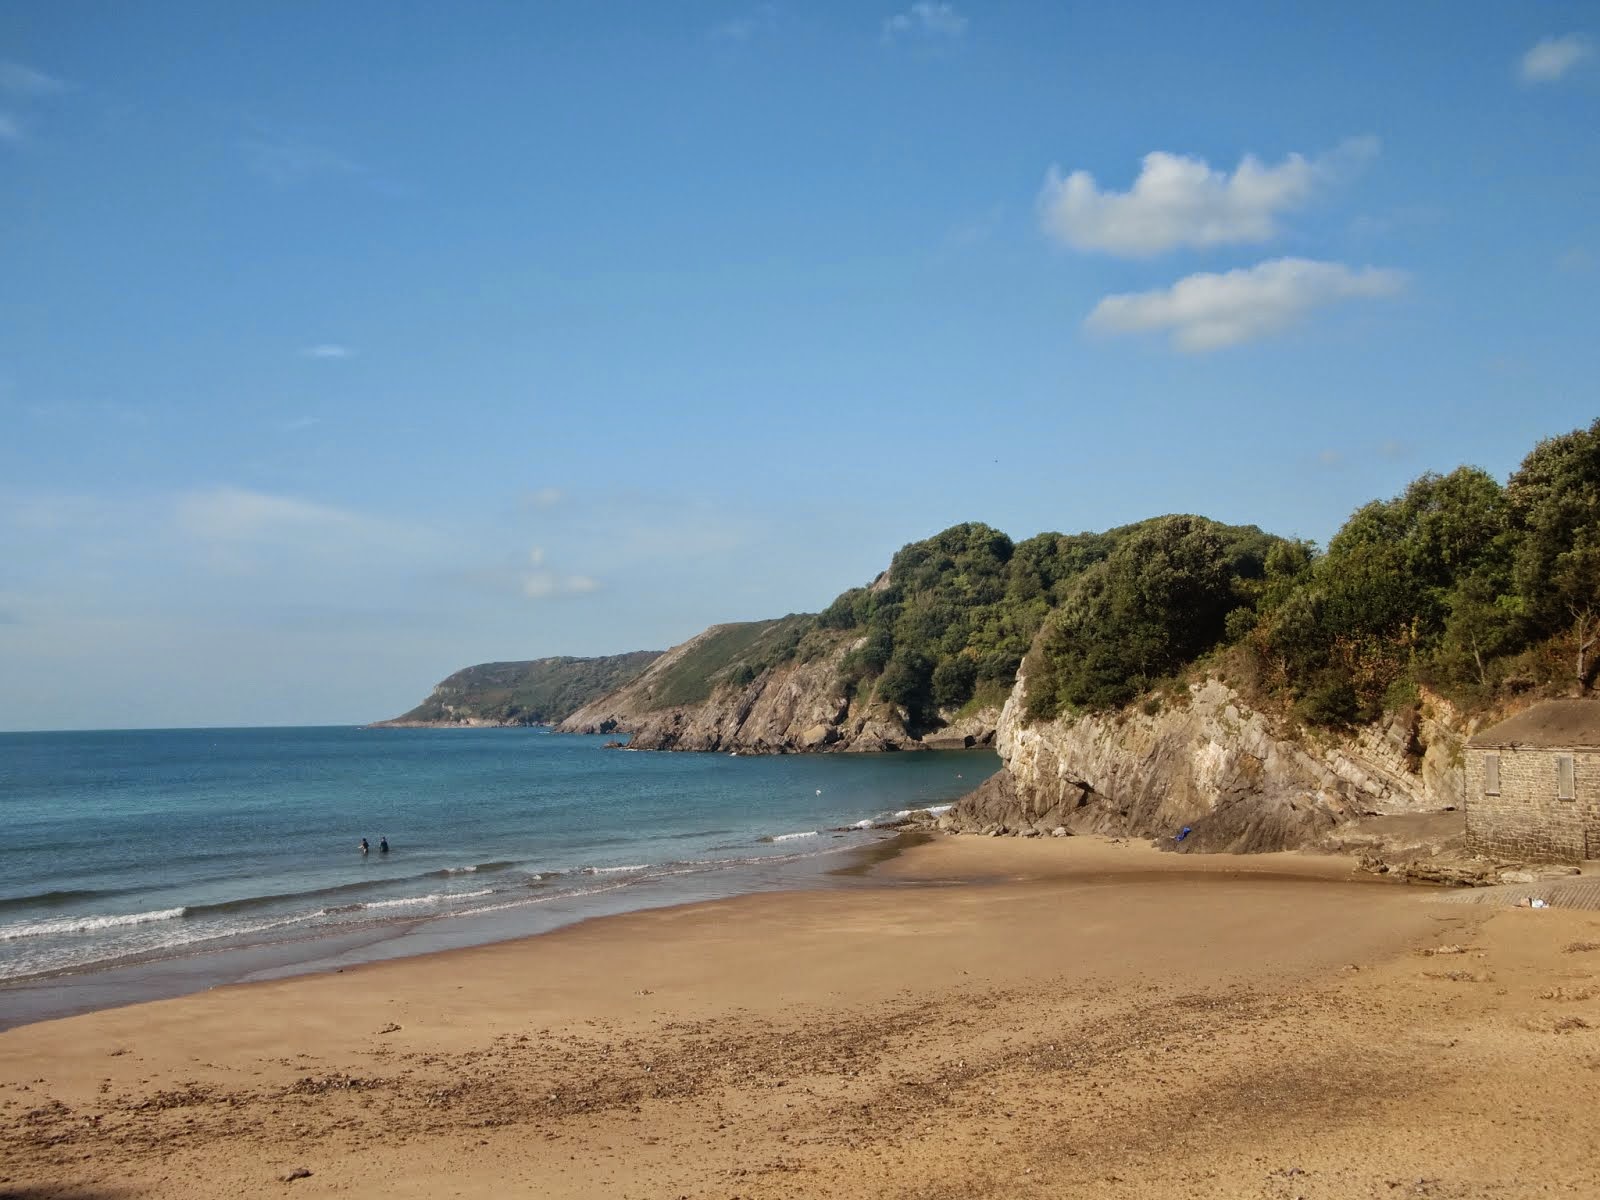 Caswell Bay